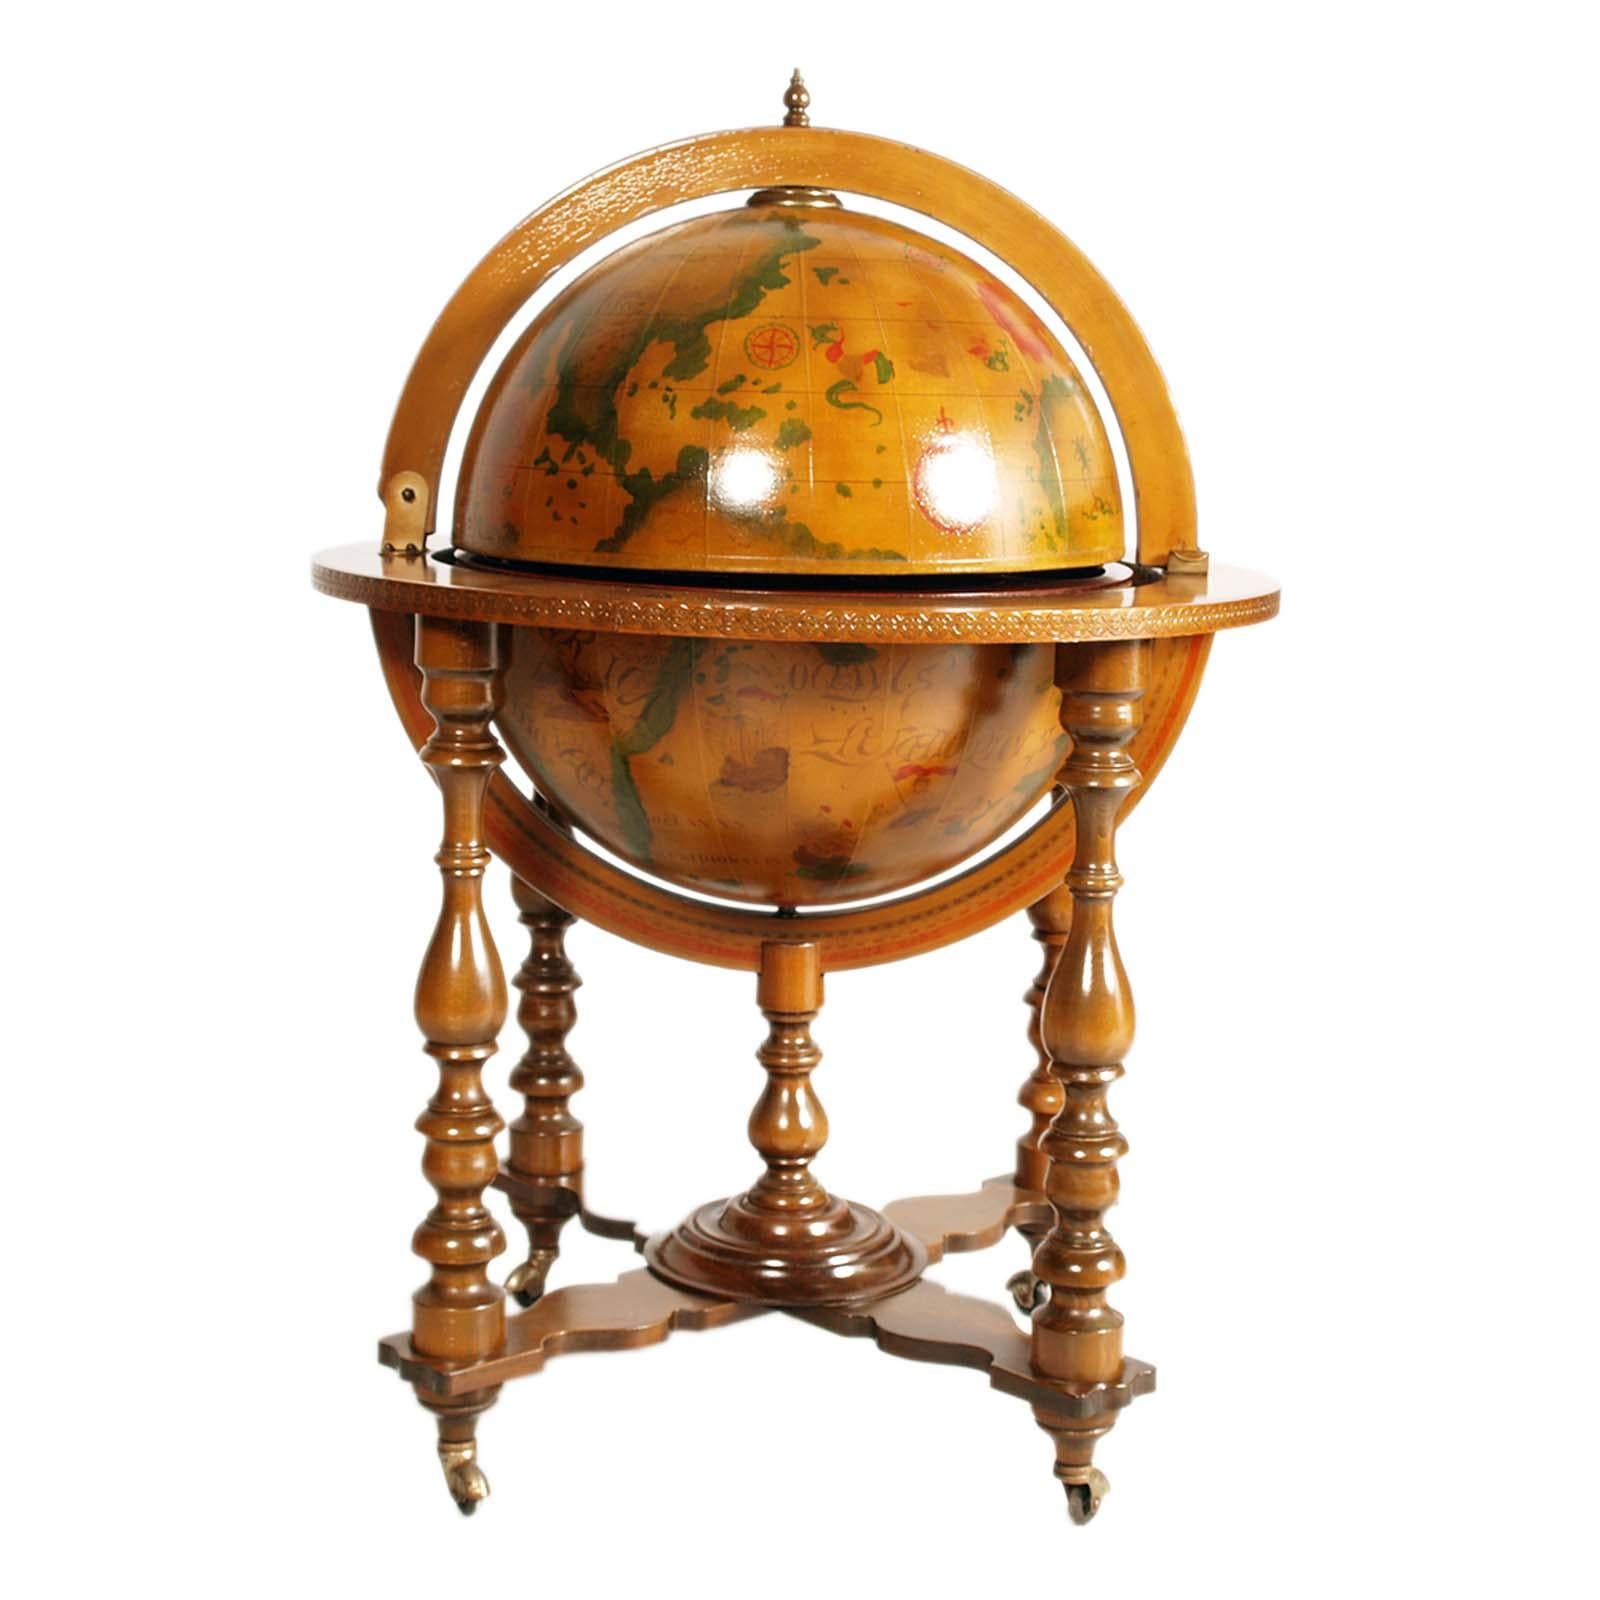 Italian 20th century on decorated world map cocktail bar cart. The globe rotates and is supported by a four-legged structure on wheels. The globe opens onto a compartment for bottles and glasses. The  equatorial ring and iteriors of the globe